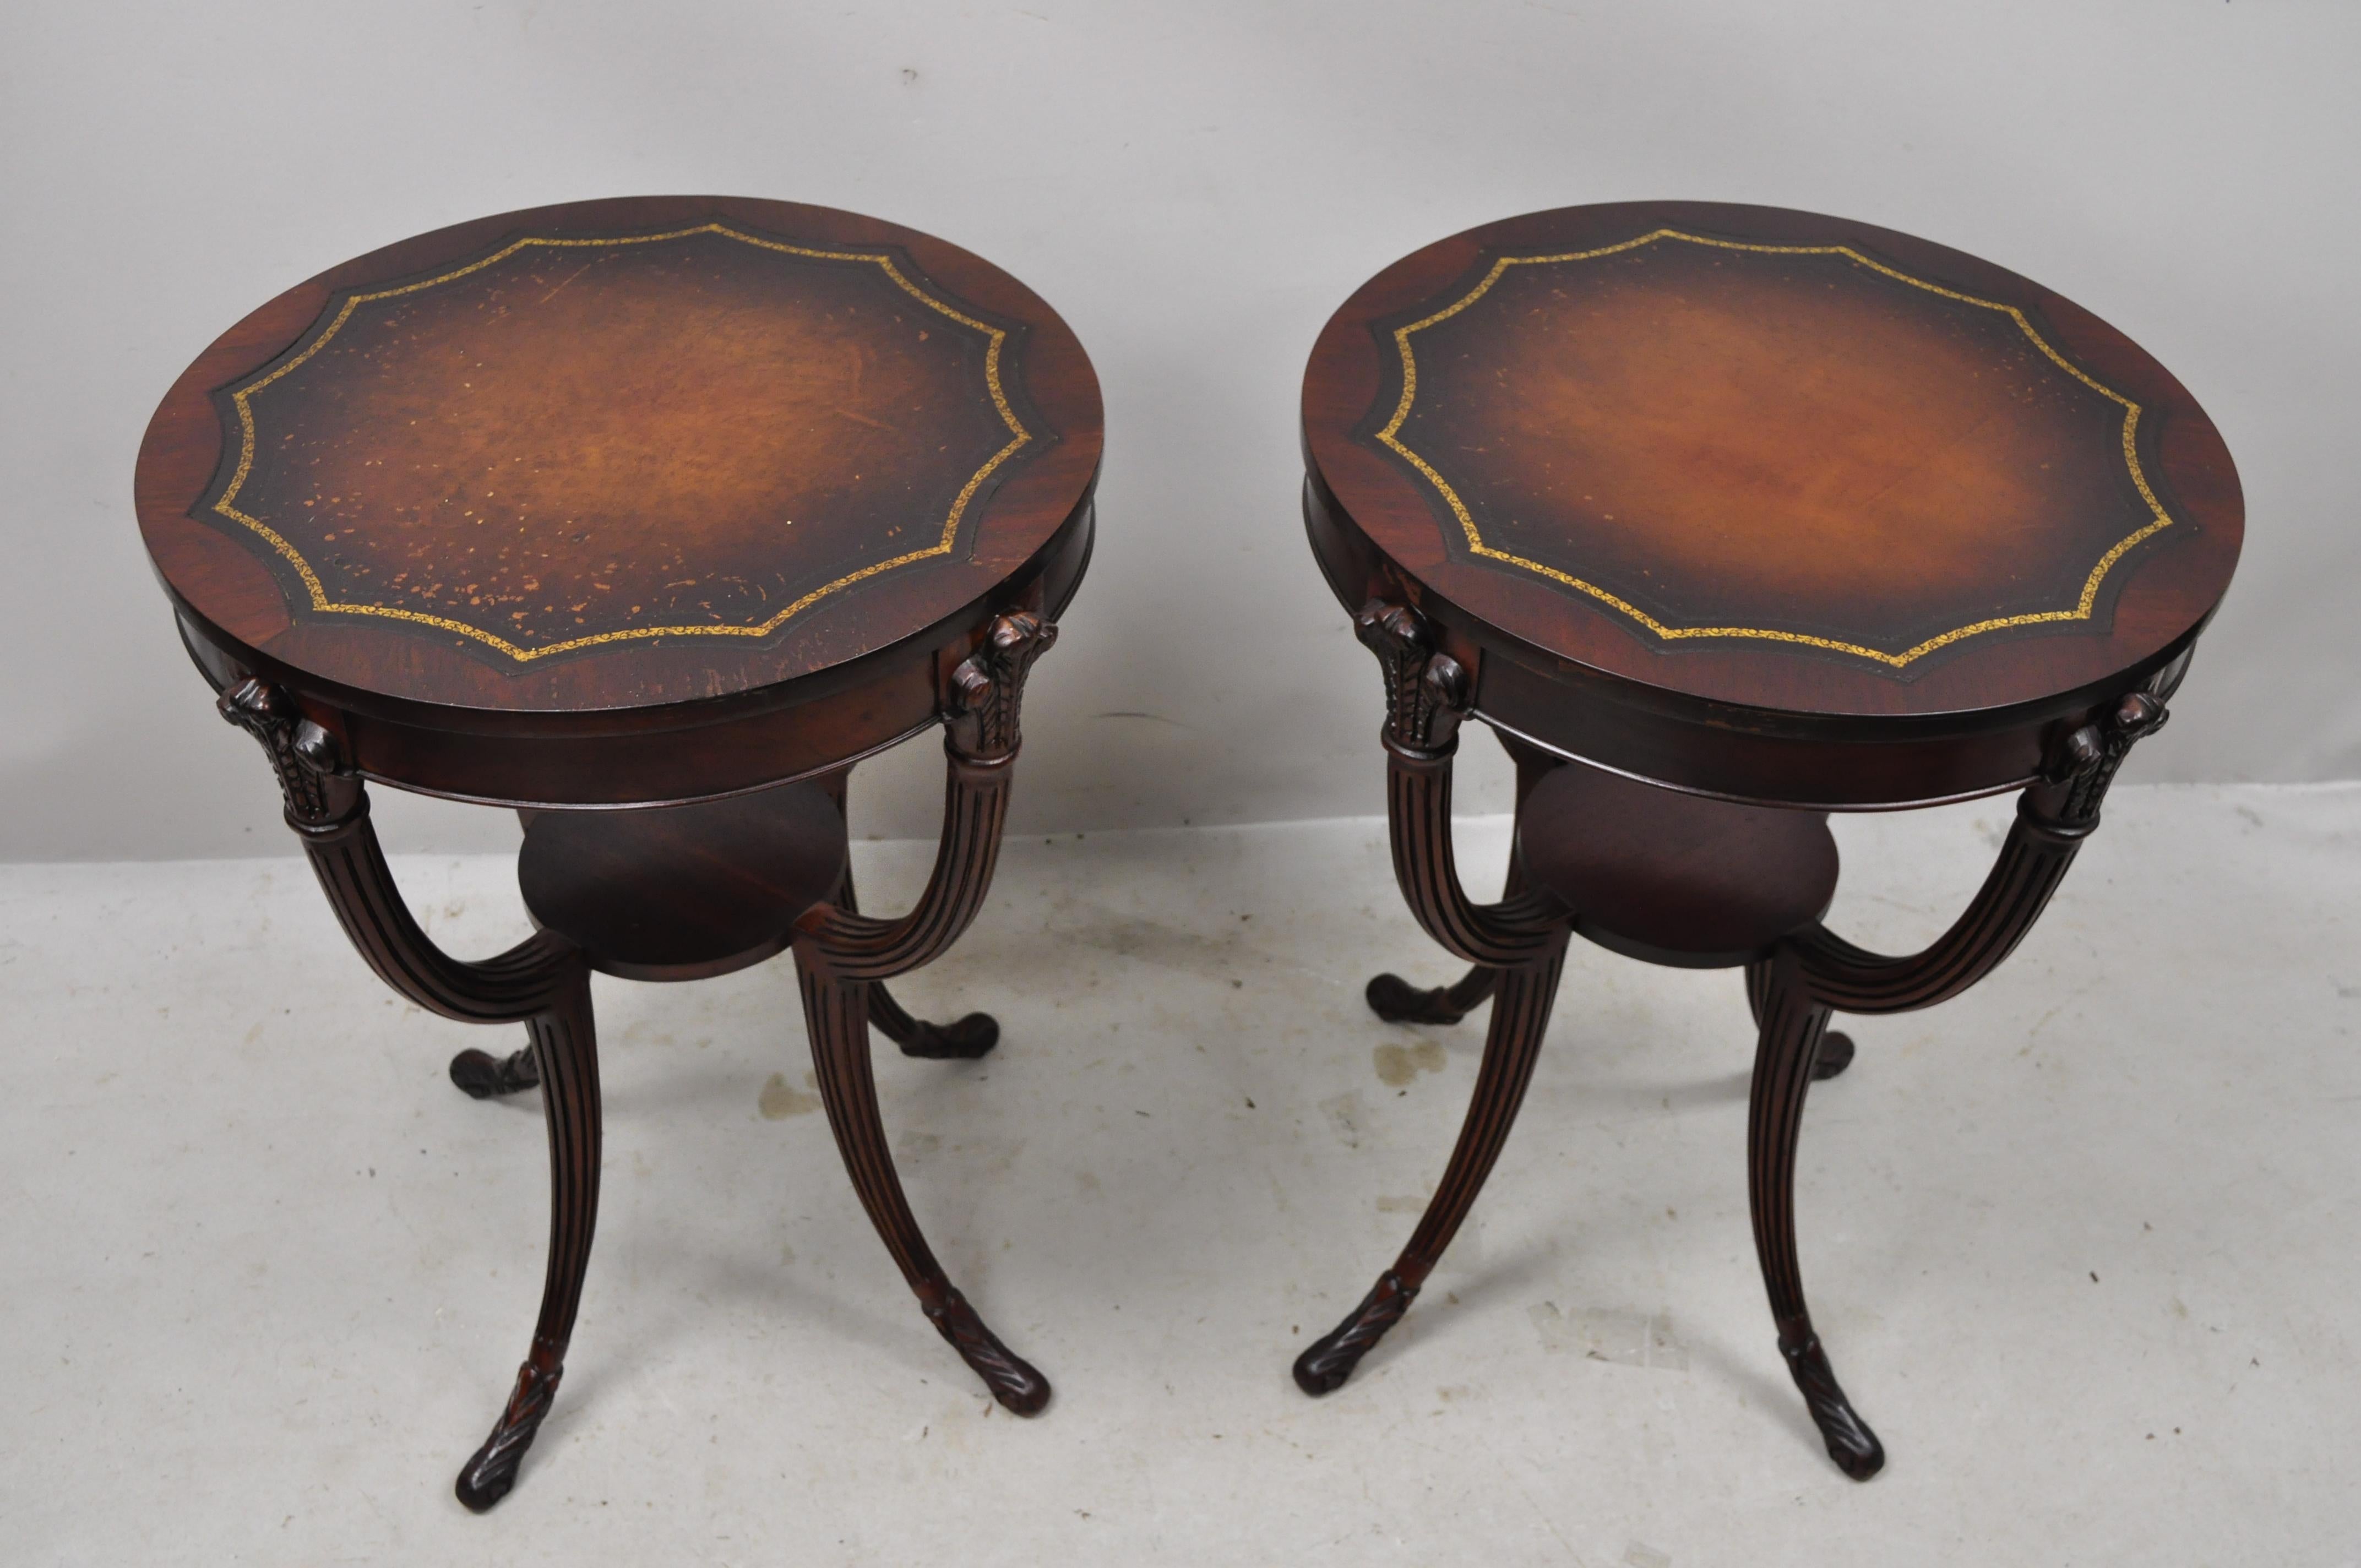 French Hollywood Regency Grosfeld House style Plume carved leather top mahogany end tables - a pair. Item features tooled leather tops, plume carved accents, lower shelf, saber legs, solid wood construction, nicely carved details, very nice antique